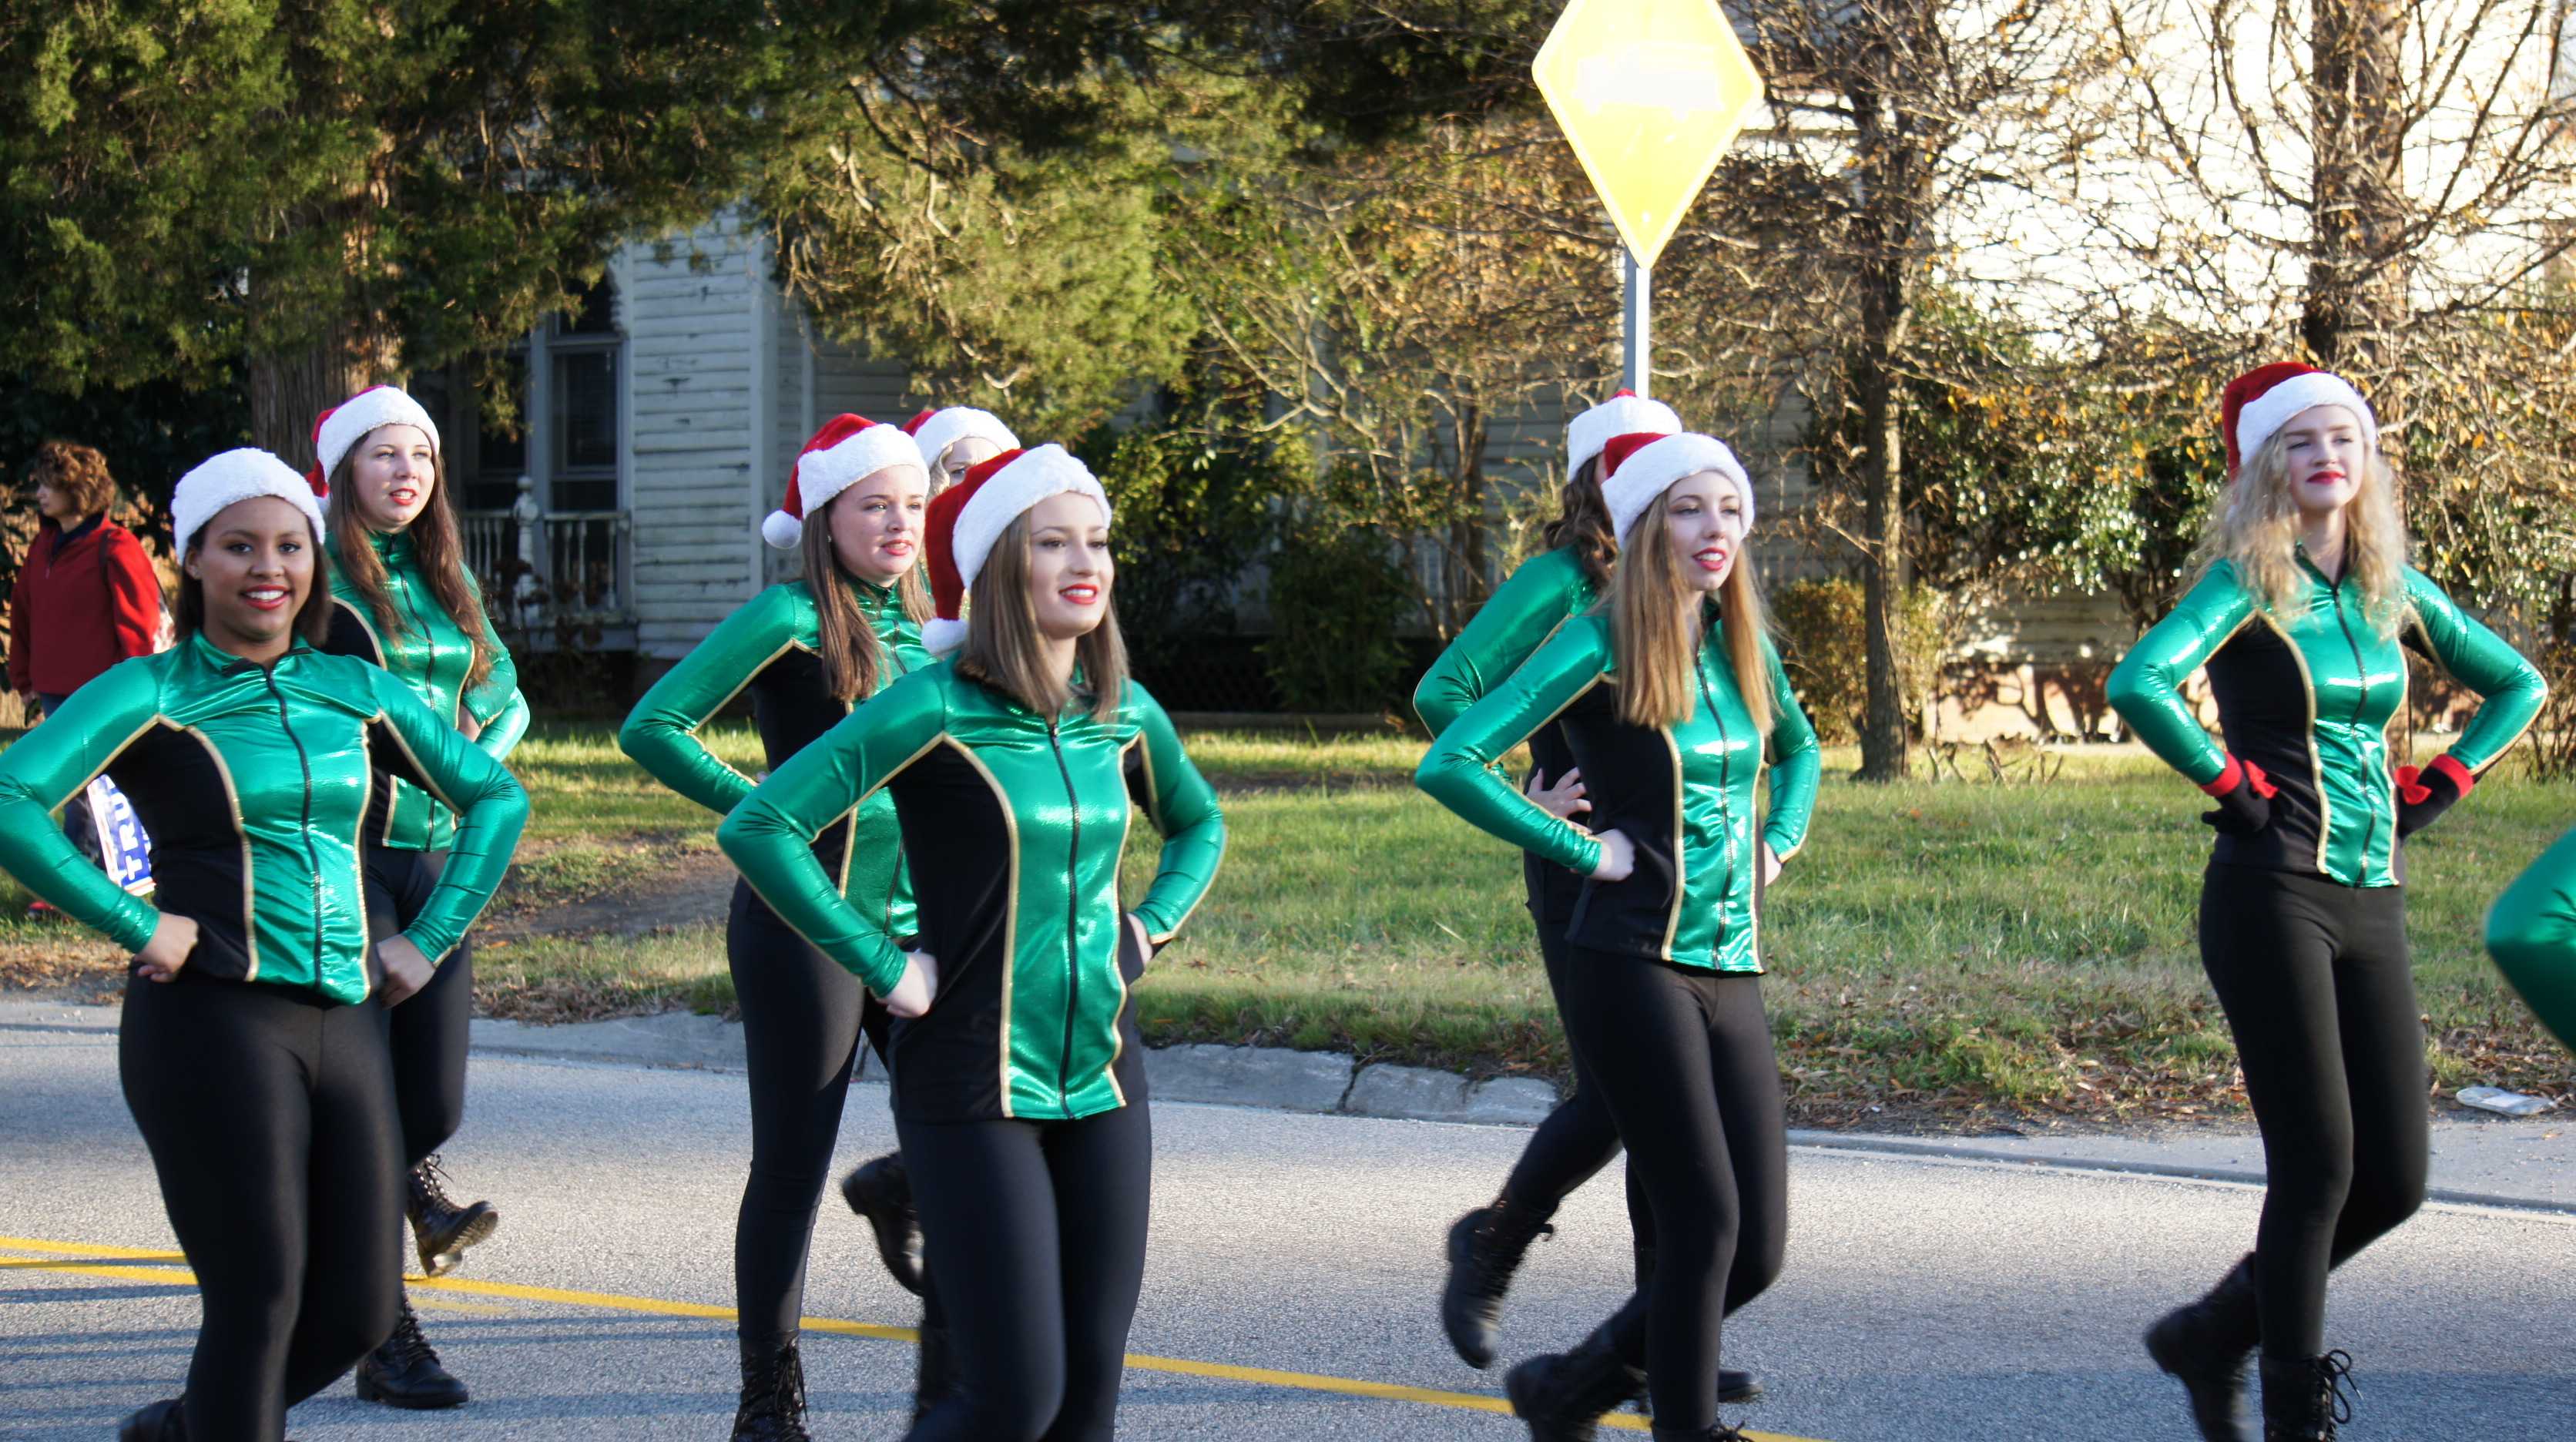 Royalettes, including Rebecca Johnson, dance at the parade.